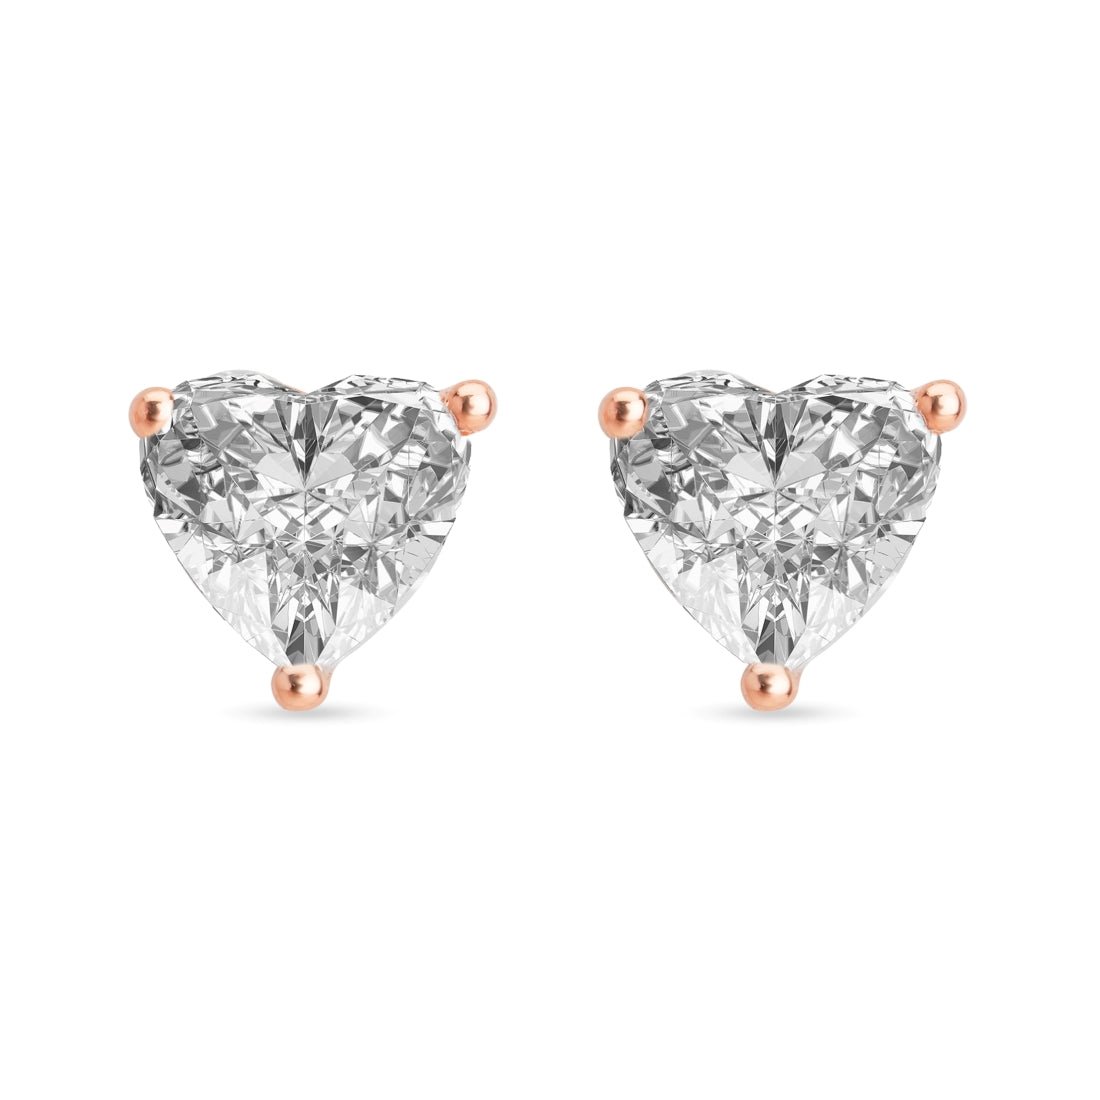 Romantic Heart Rose Gold Plated 925 Sterling Silver Stud Earrings